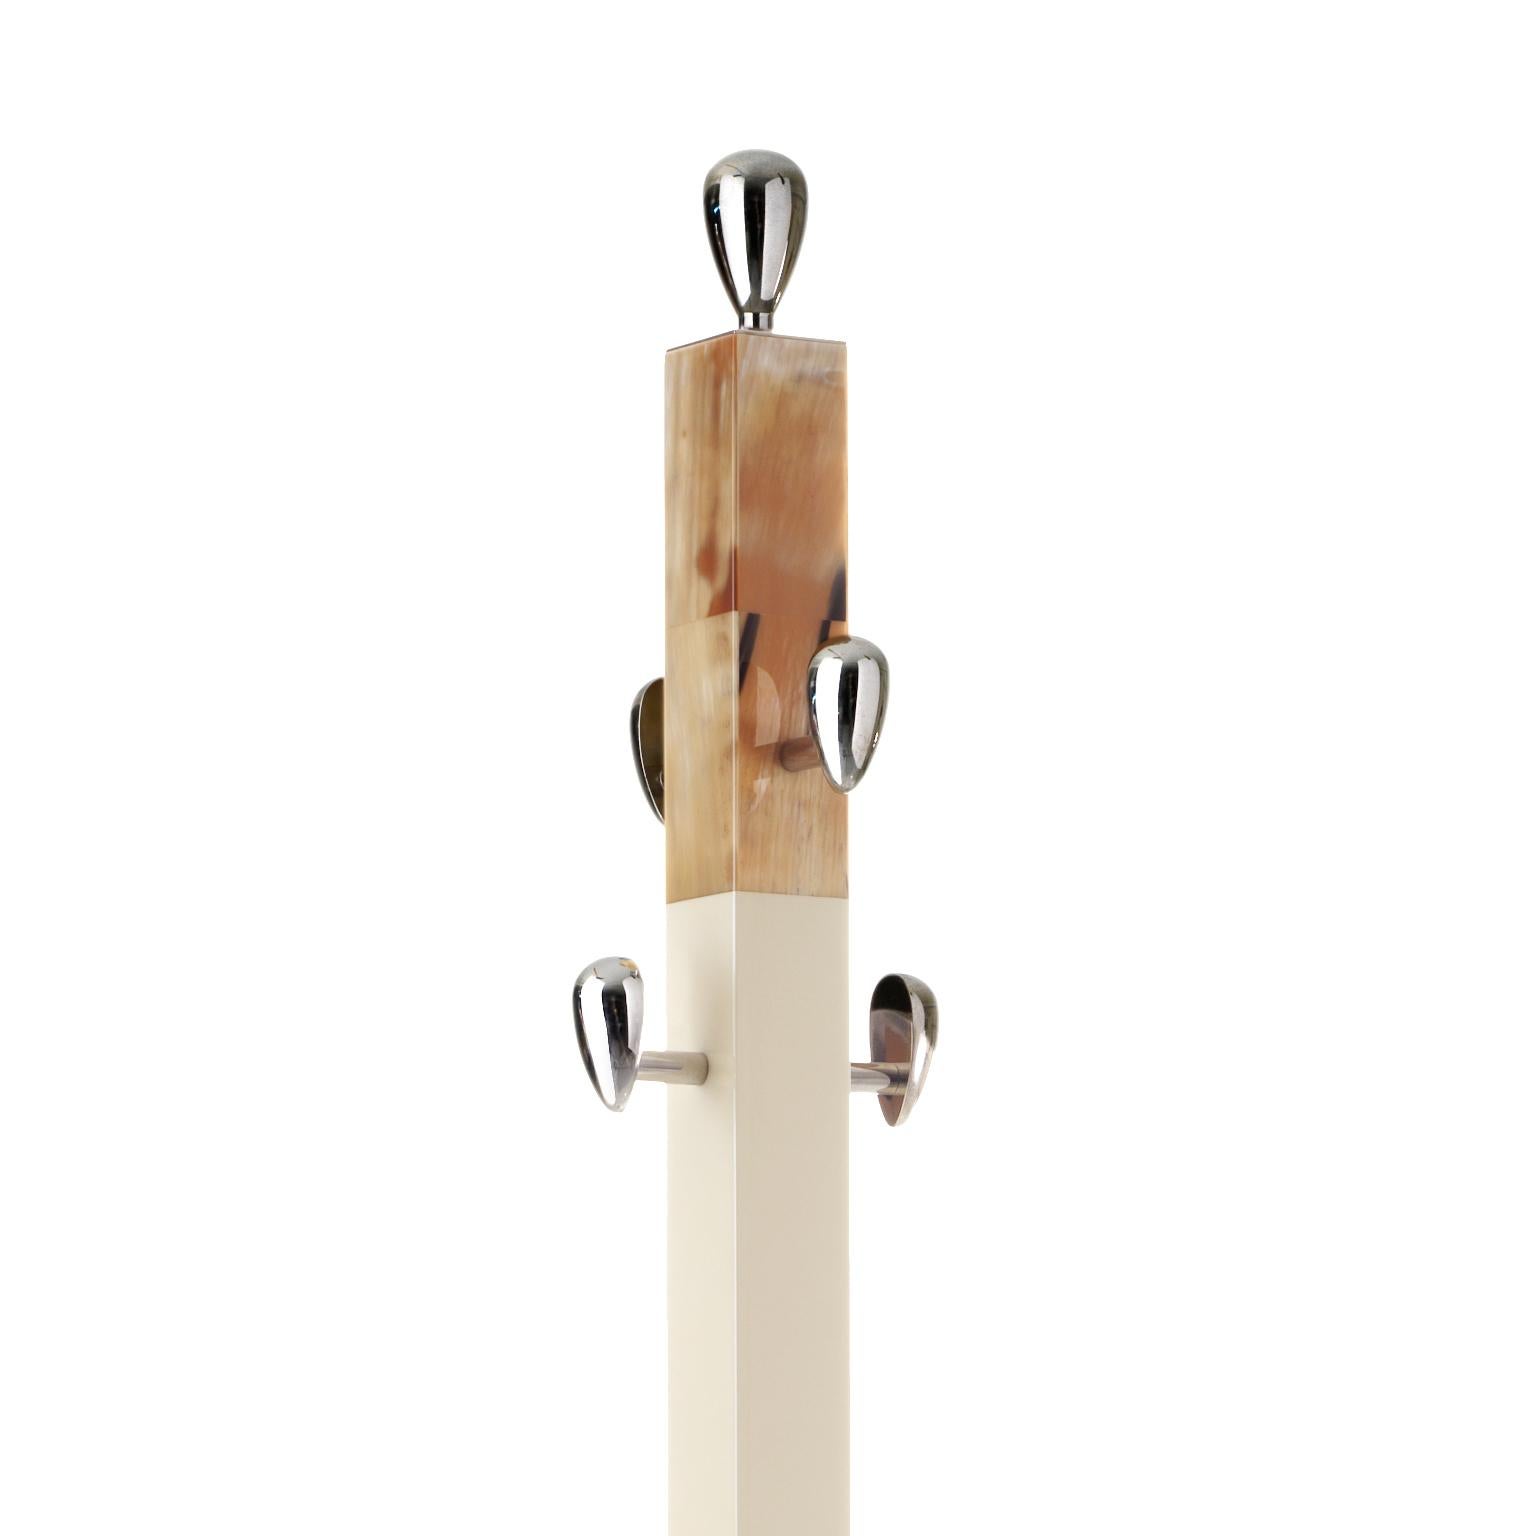 The Giglio coat stand is a functional decorative statement. With a slim cream-colored stem standing atop a wide base in chromed brass, this coat stand is adorned with inlays in Corno Italiano which add an opulent touch to the wooden structure.